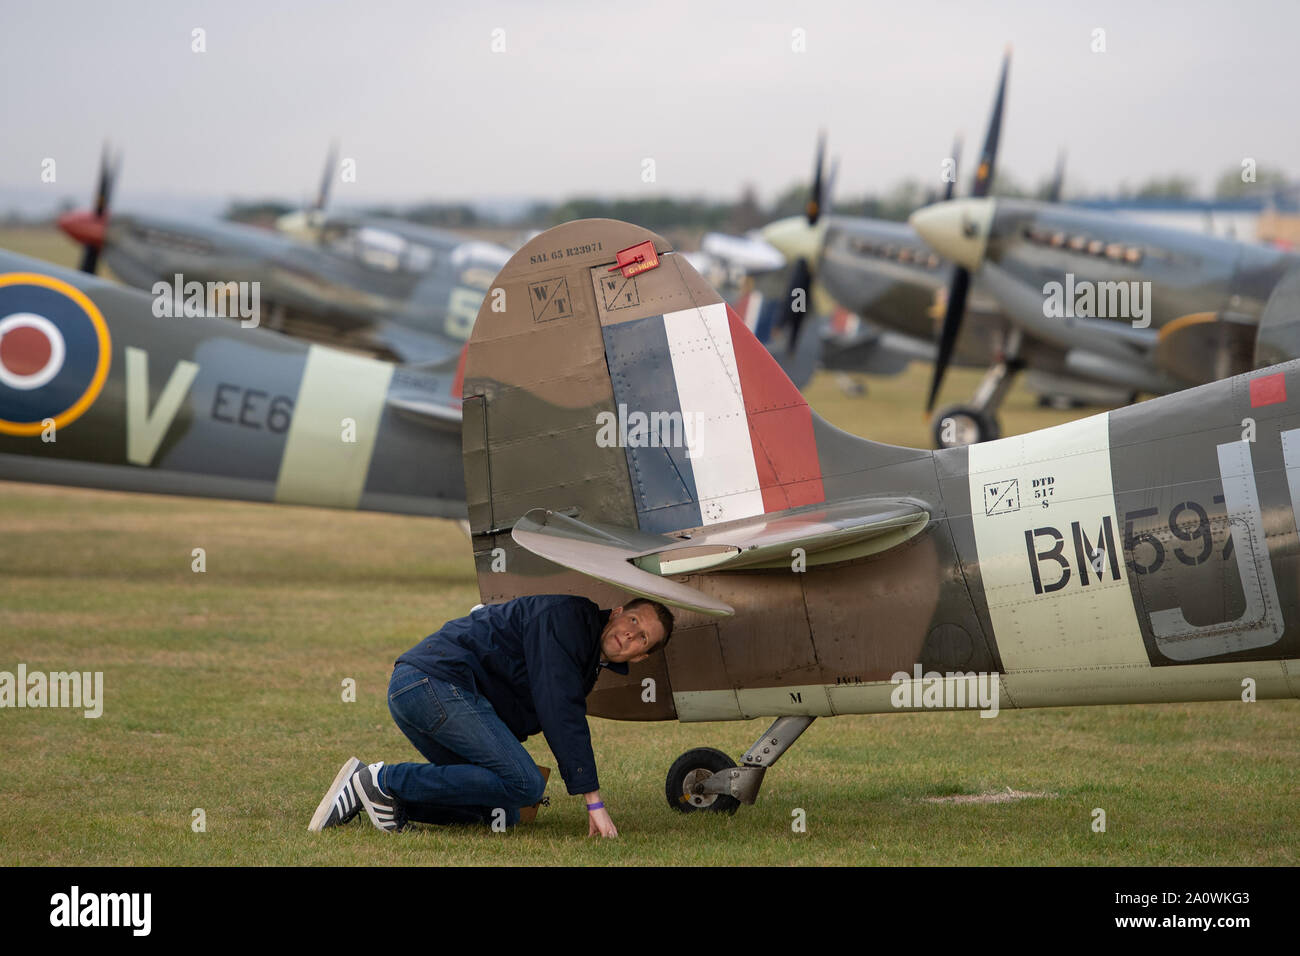 A flight mechanic inspects a Supermarine Spitfire during the Duxford Battle of Britain Air Show at the Imperial War Museum in Duxford, Cambridgeshire. Stock Photo